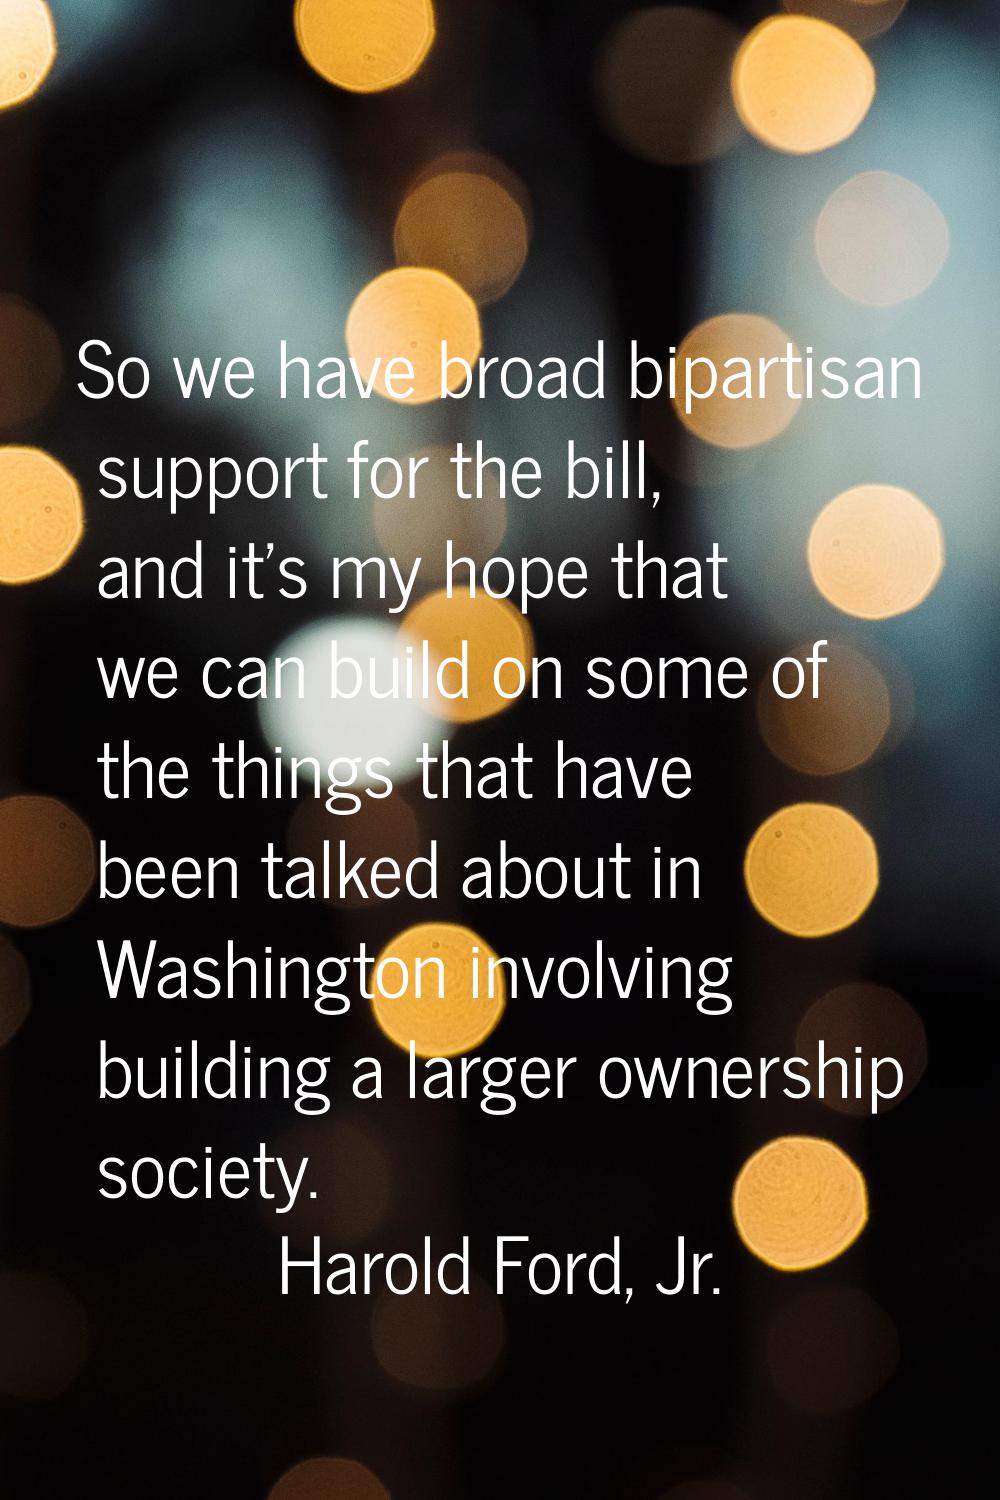 So we have broad bipartisan support for the bill, and it's my hope that we can build on some of the